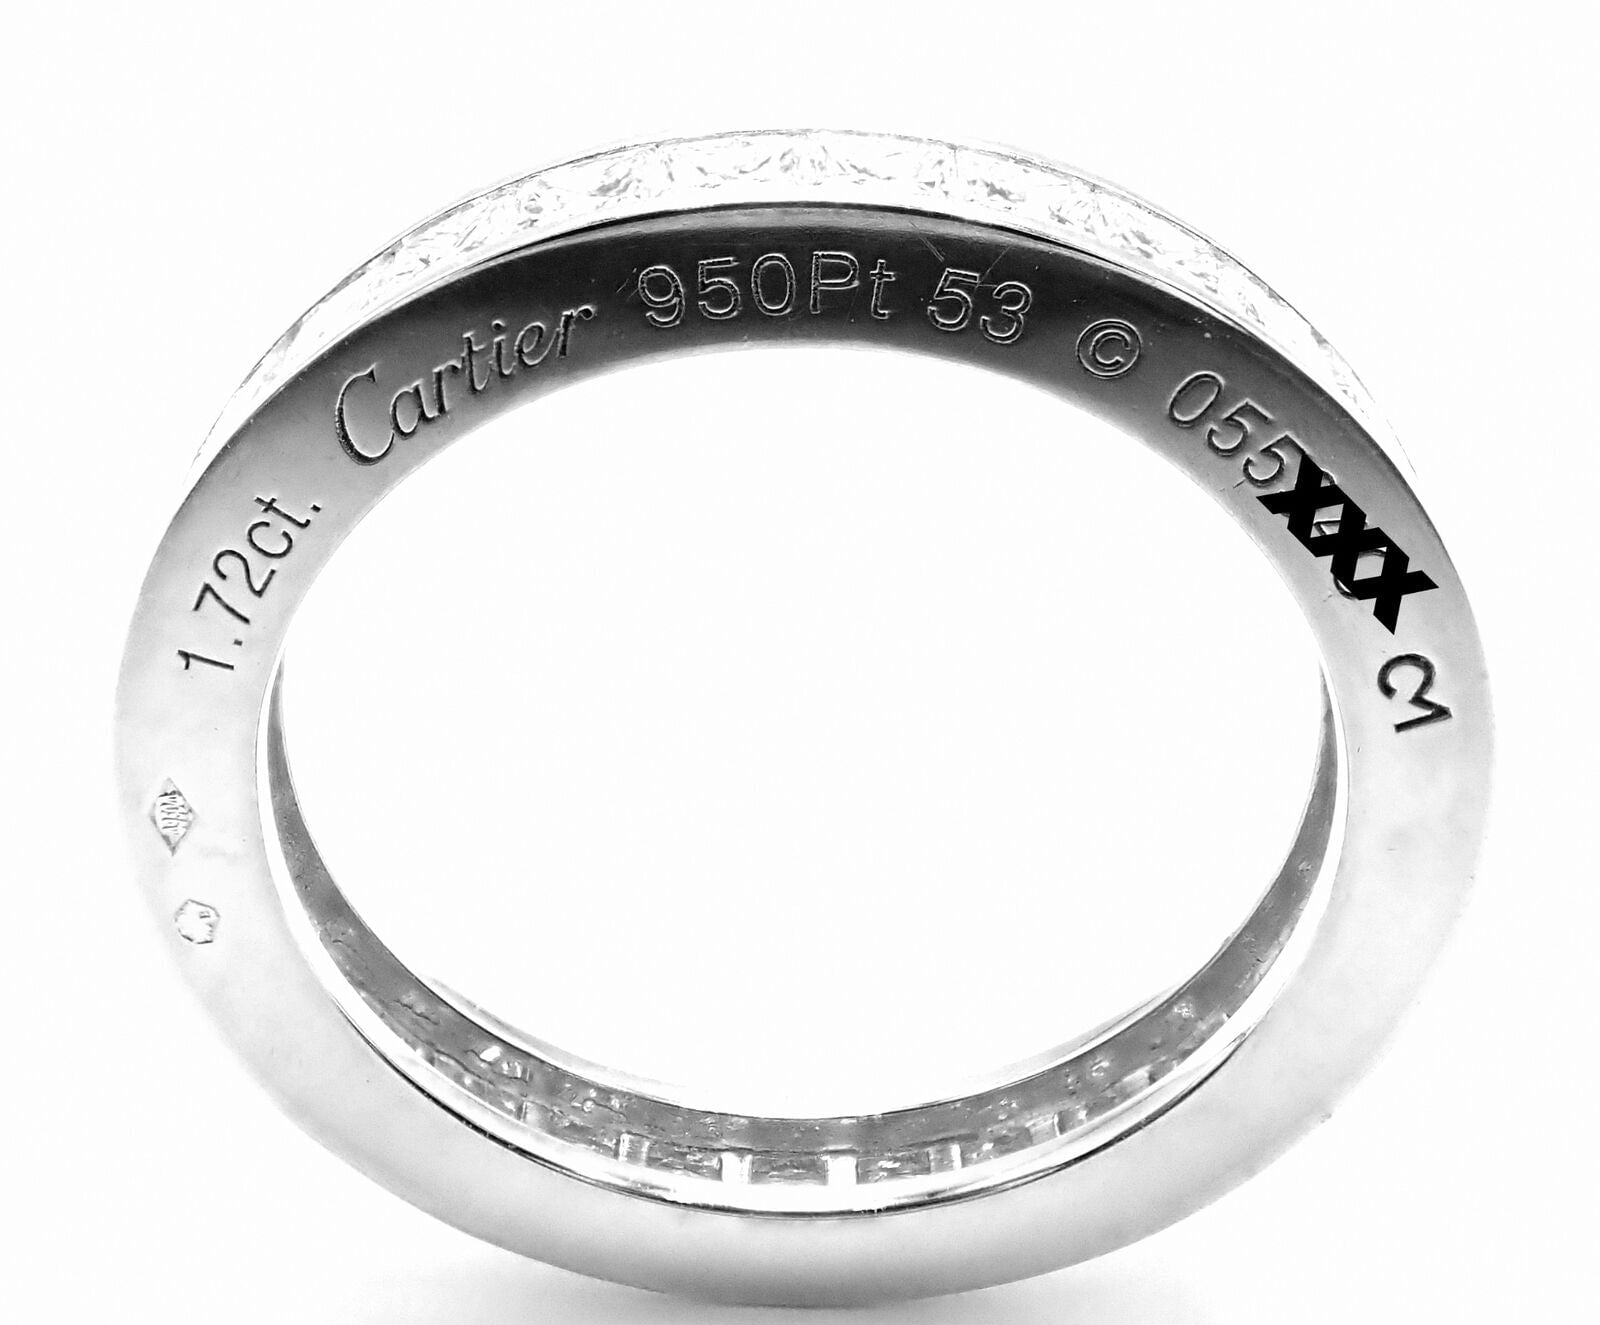 Cartier Jewelry & Watches:Fine Jewelry:Rings Cartier Platinum Princess Cut Diamond Eternity Band Ring Size 53 US 6.75 Paper